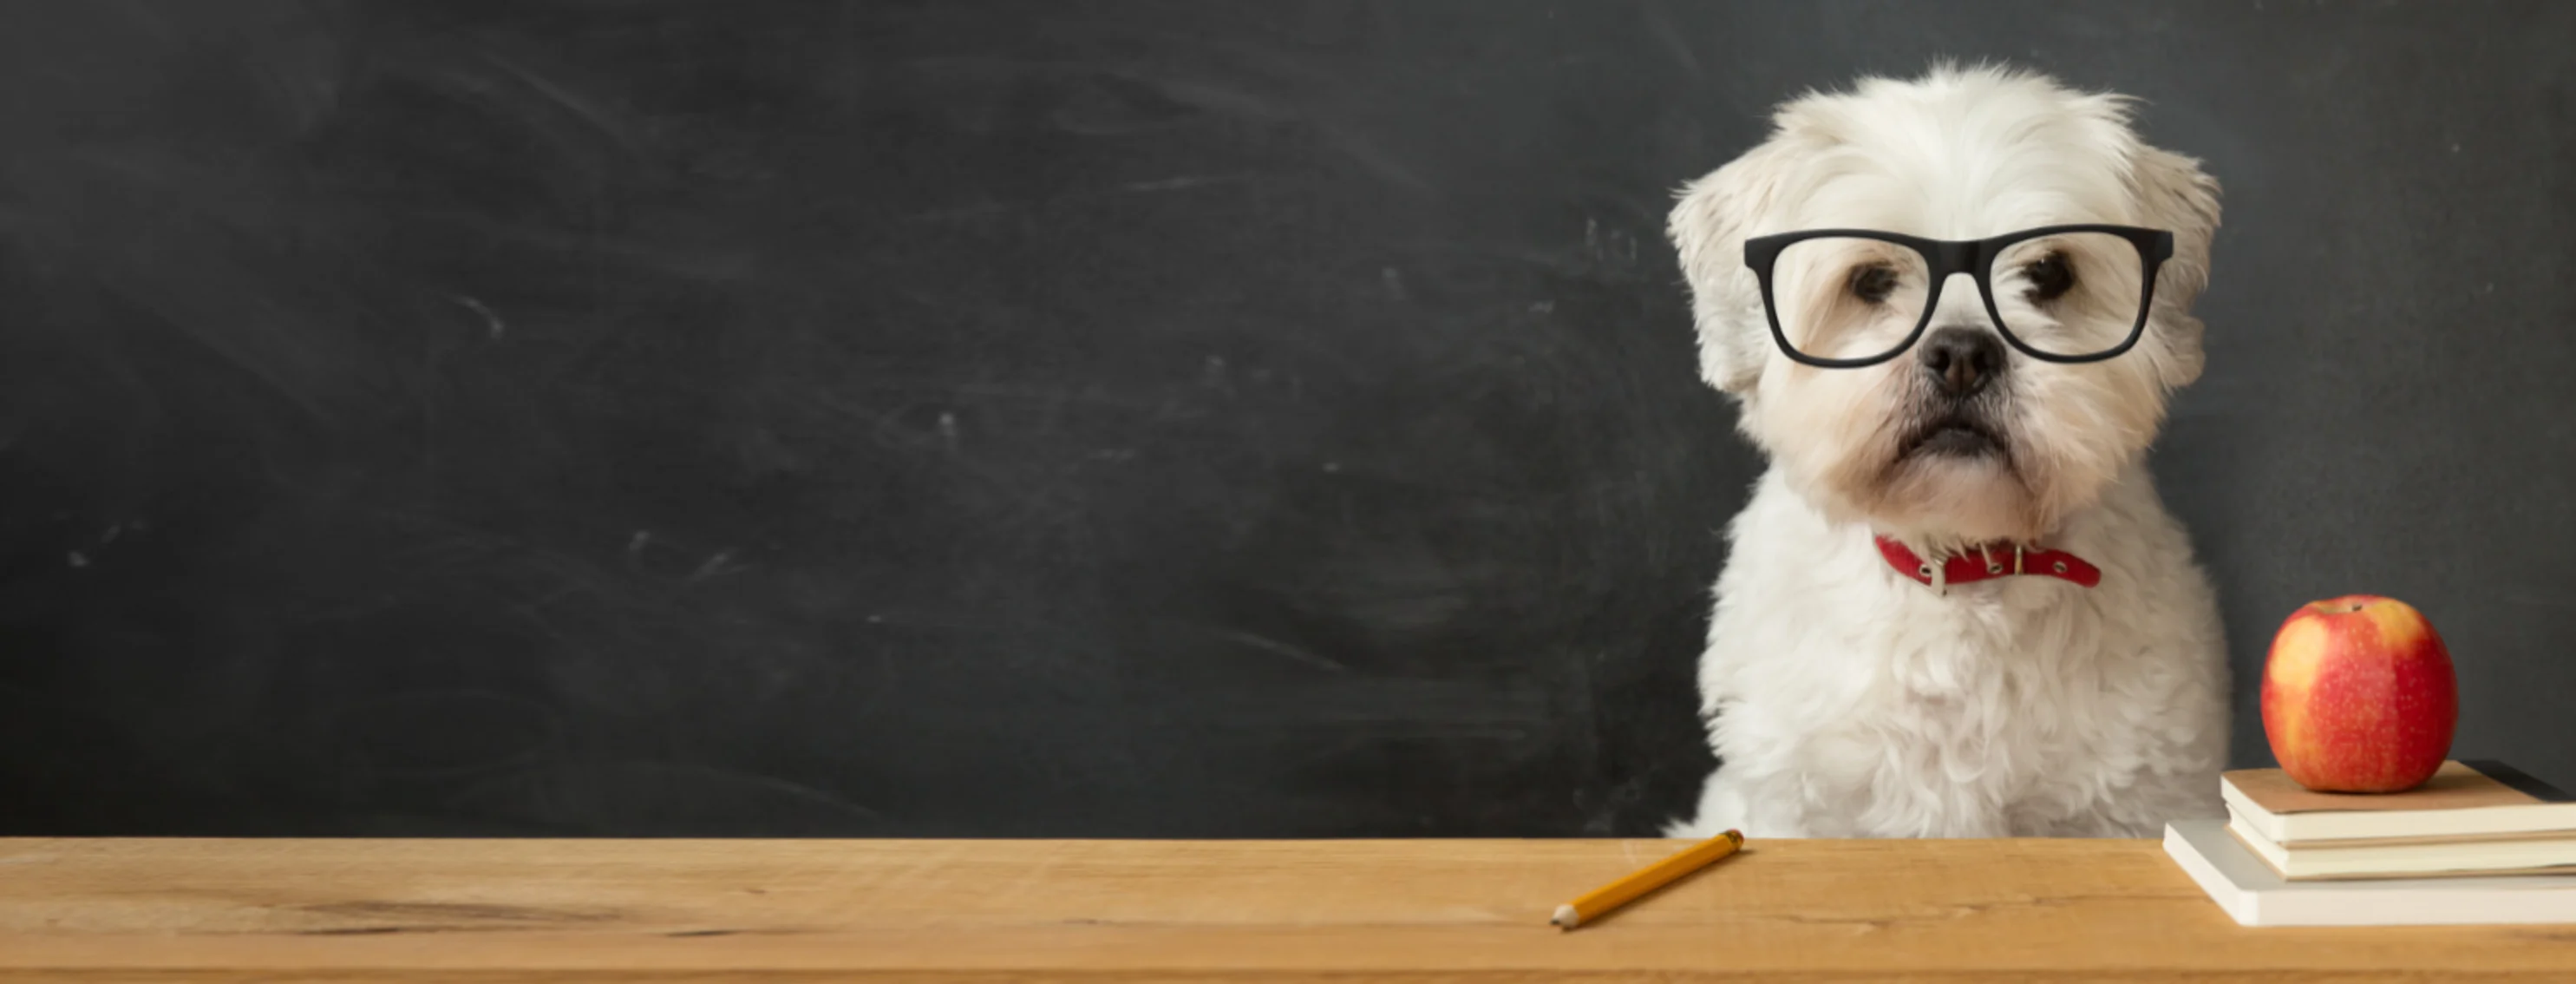 White Dog Wearing Glasses with School Supplies & Chalkboard